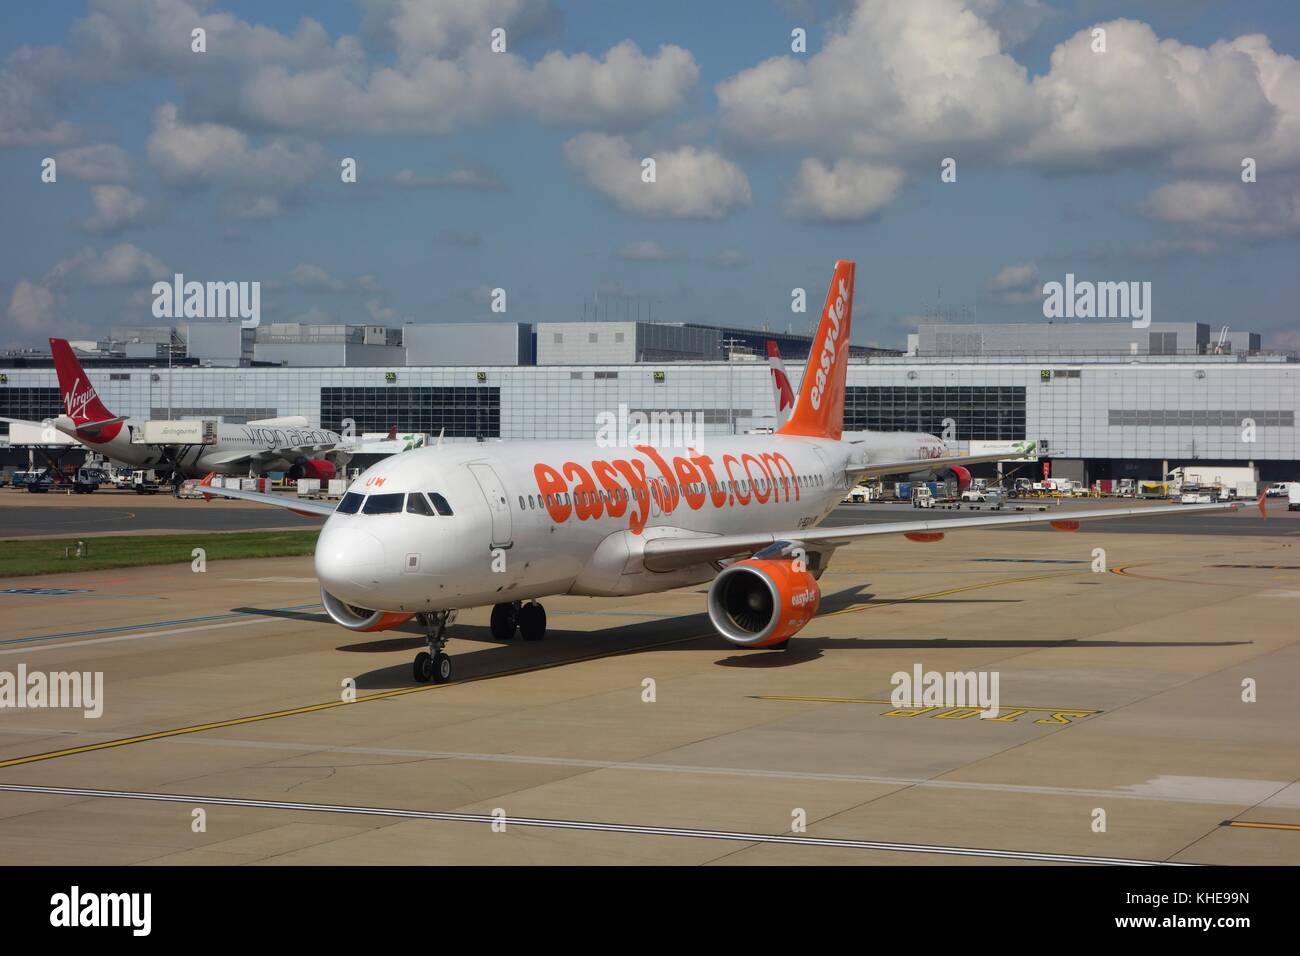 Easyjet plane on the tarmac at London Gatwick airport in England, UK Stock Photo